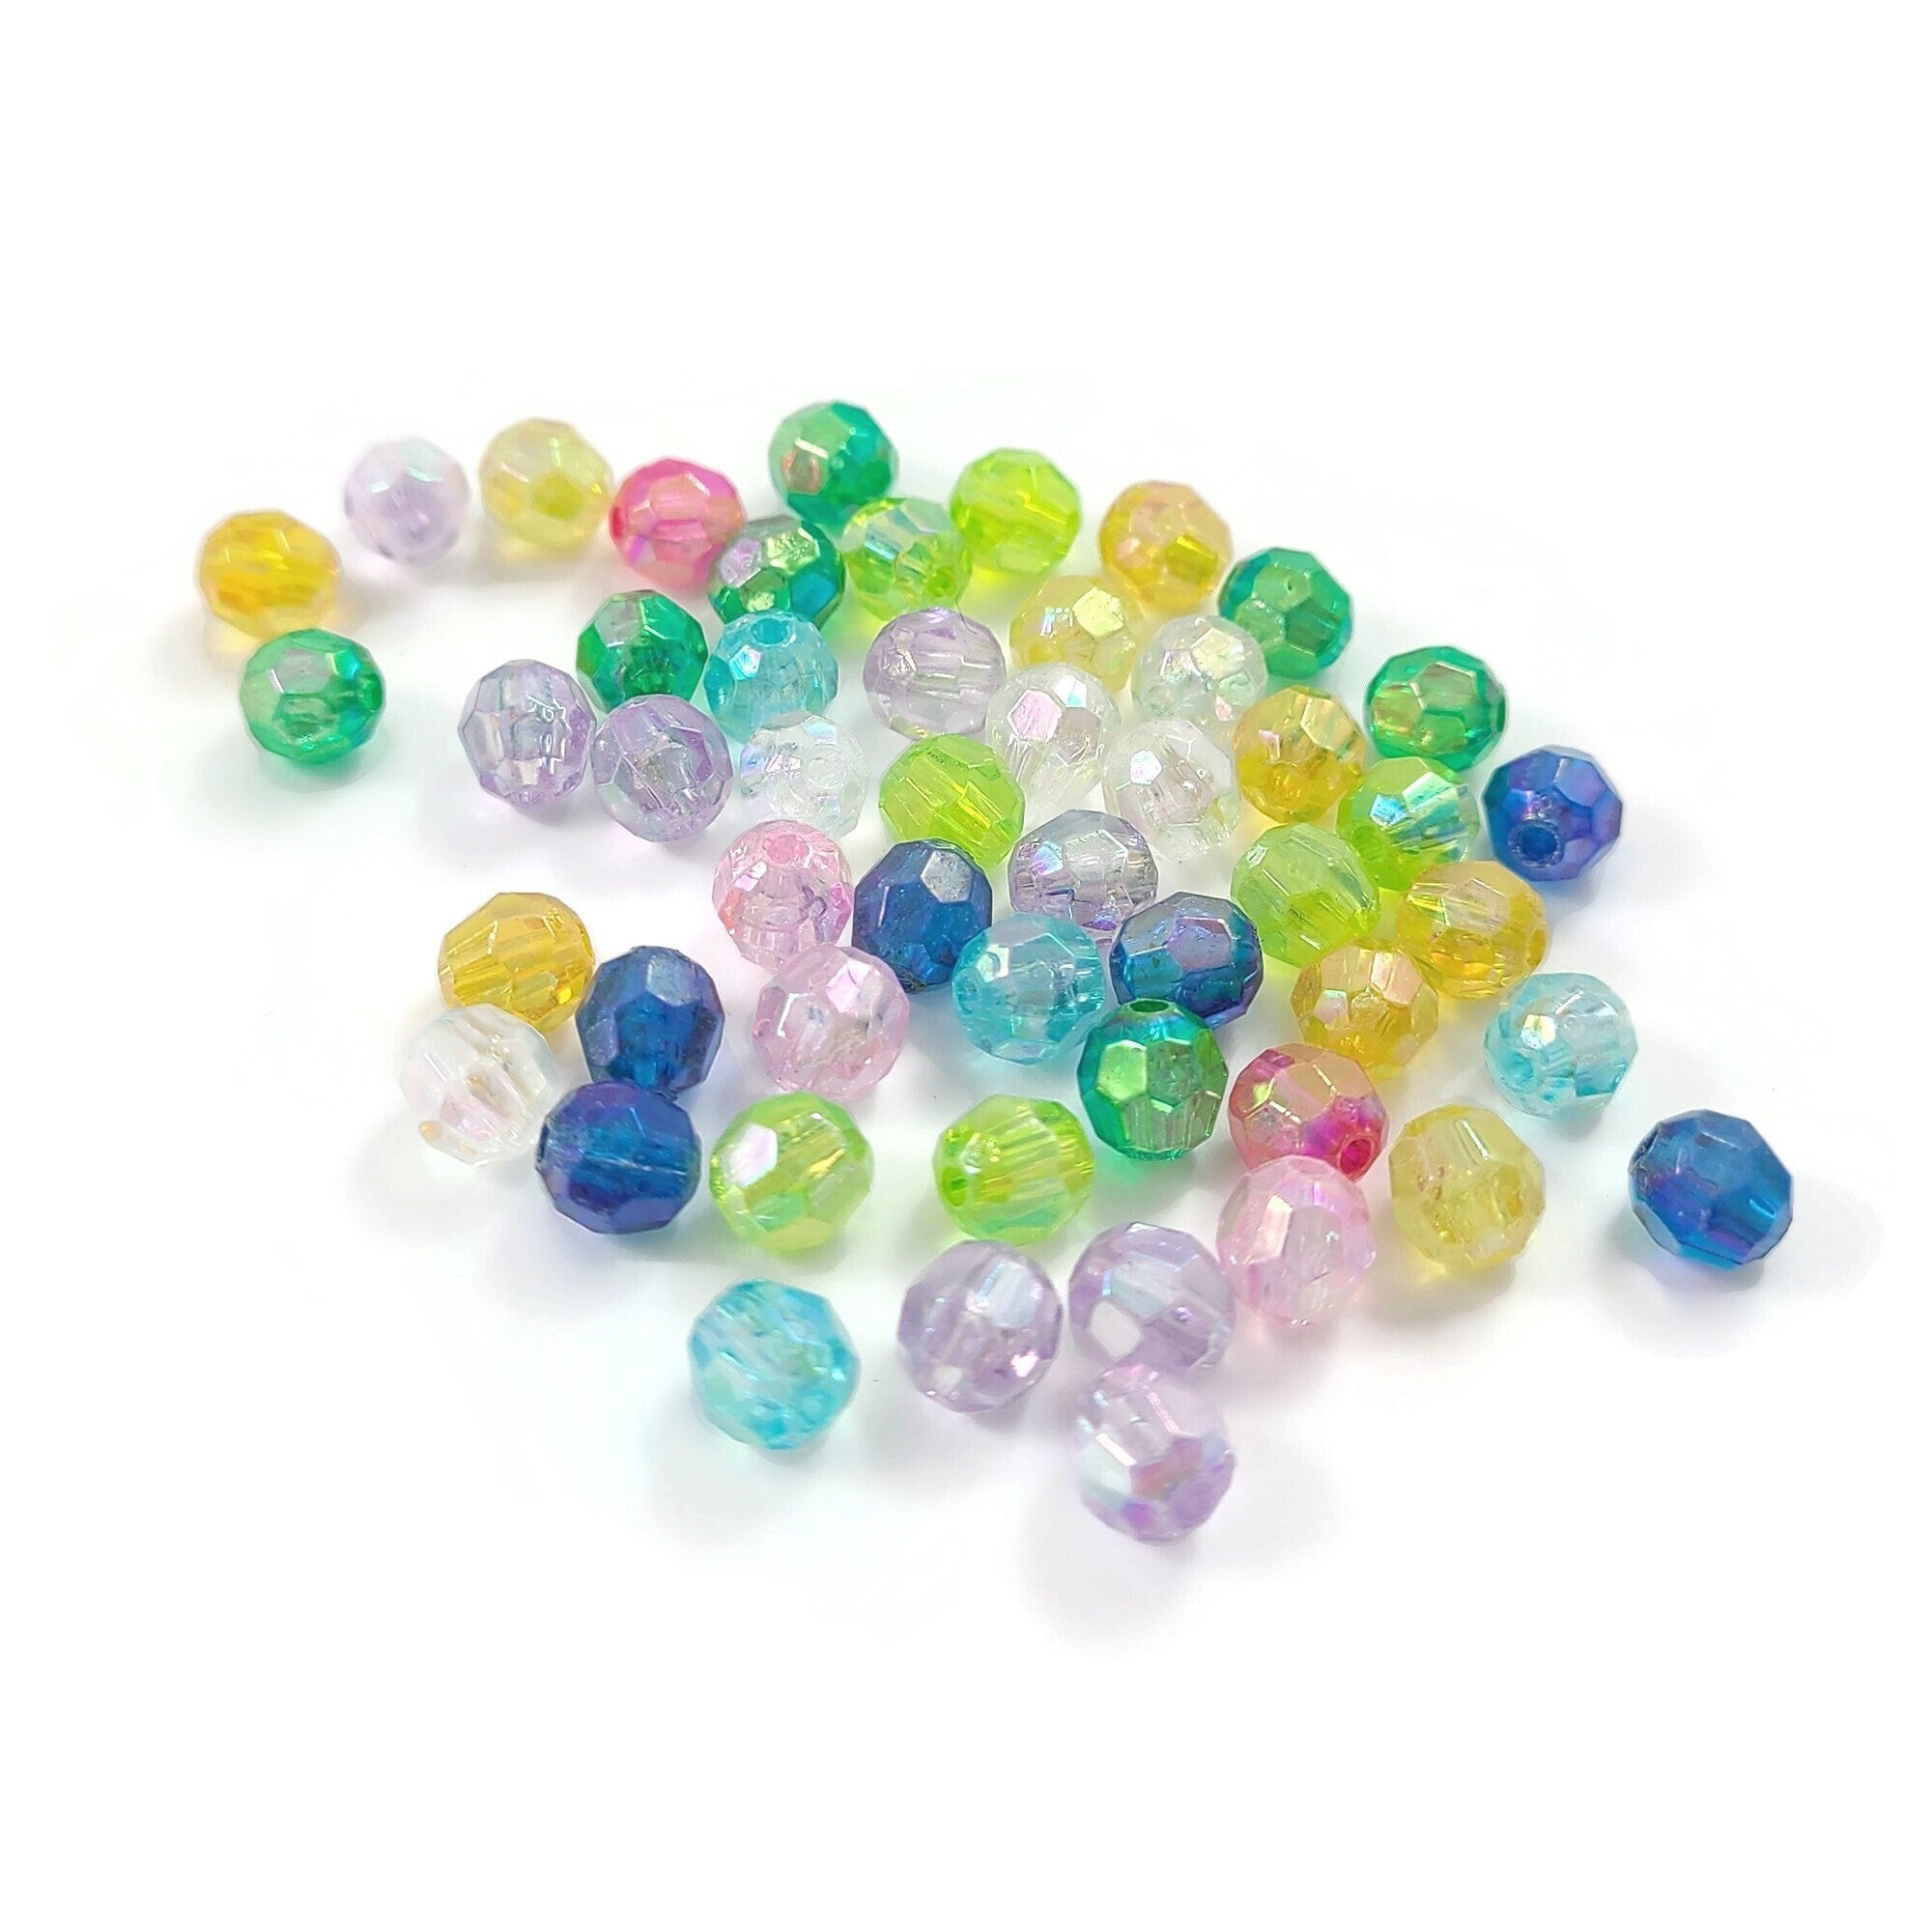 Mixed transparent pearly faceted 6mm plastic beads for jewelry making